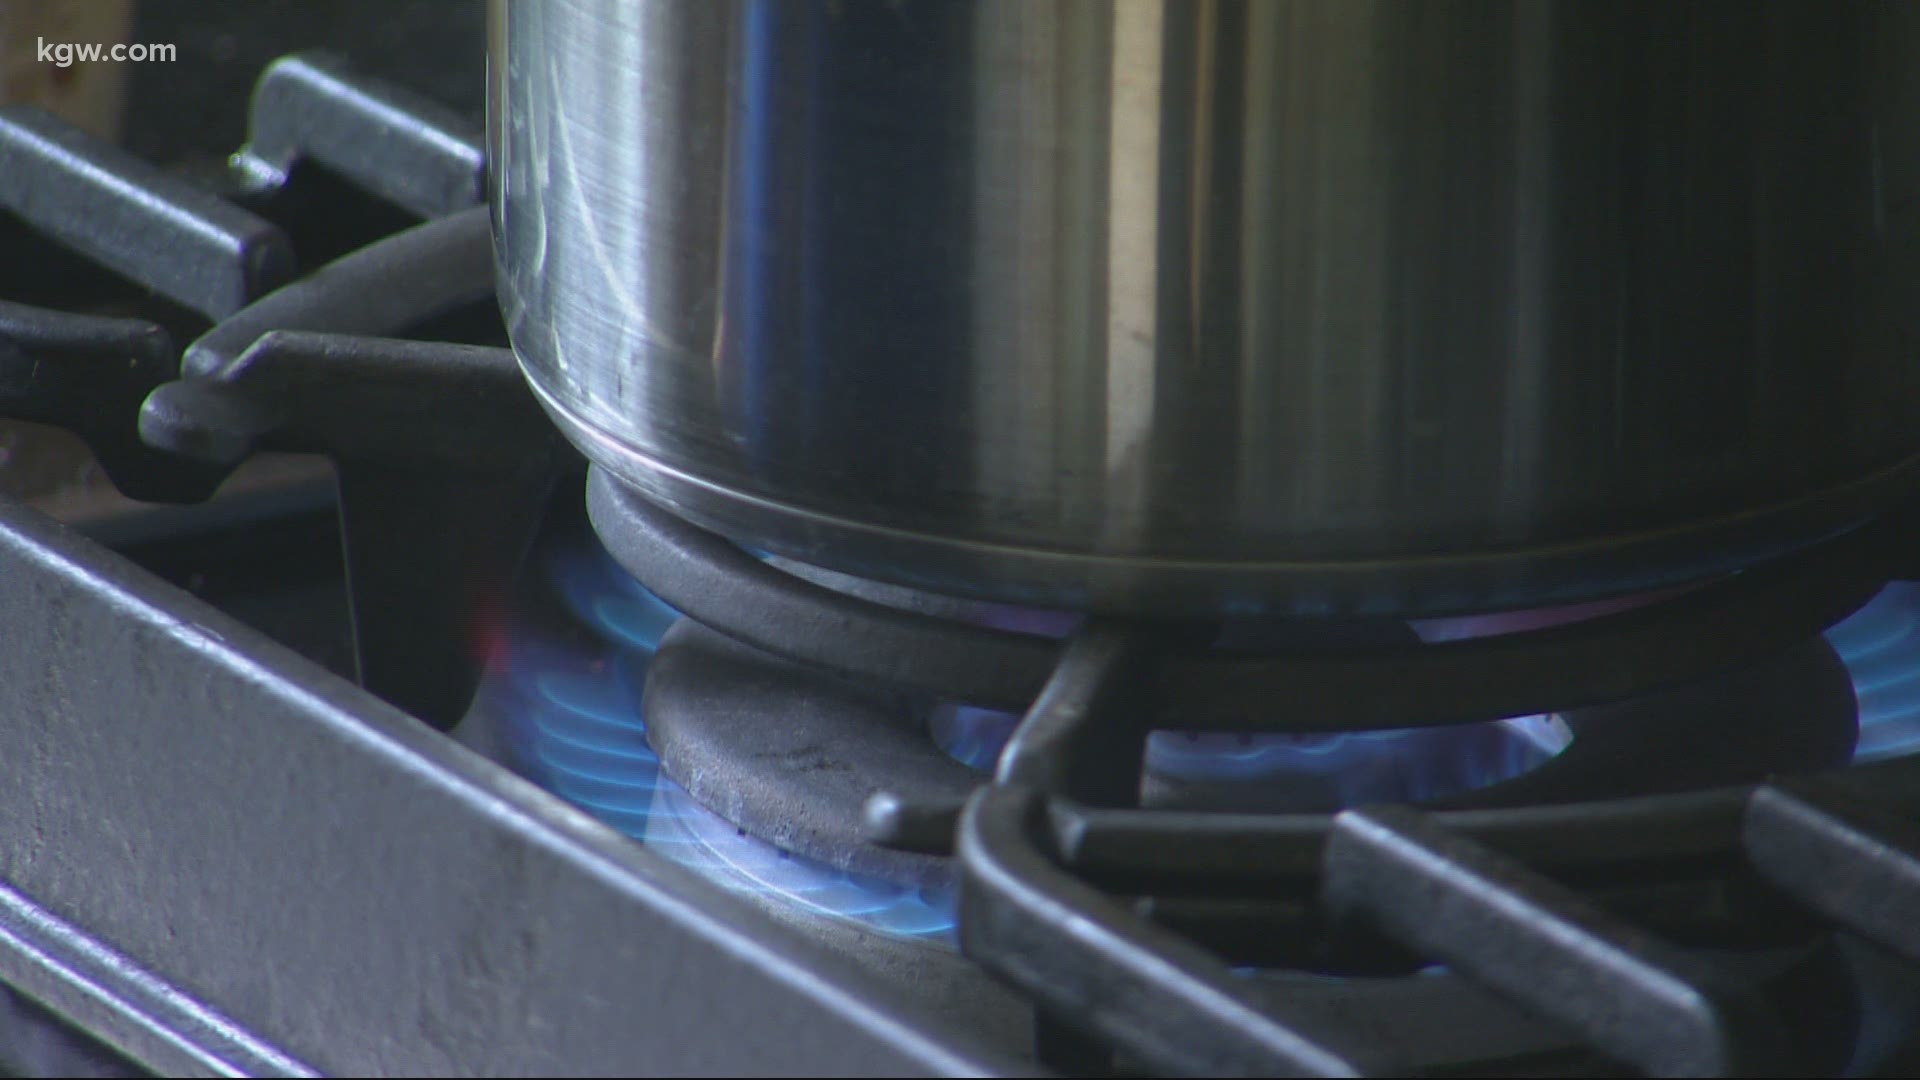 That gas stove you’re using could be making the air inside your home unhealthy. Keely Chalmers reports.